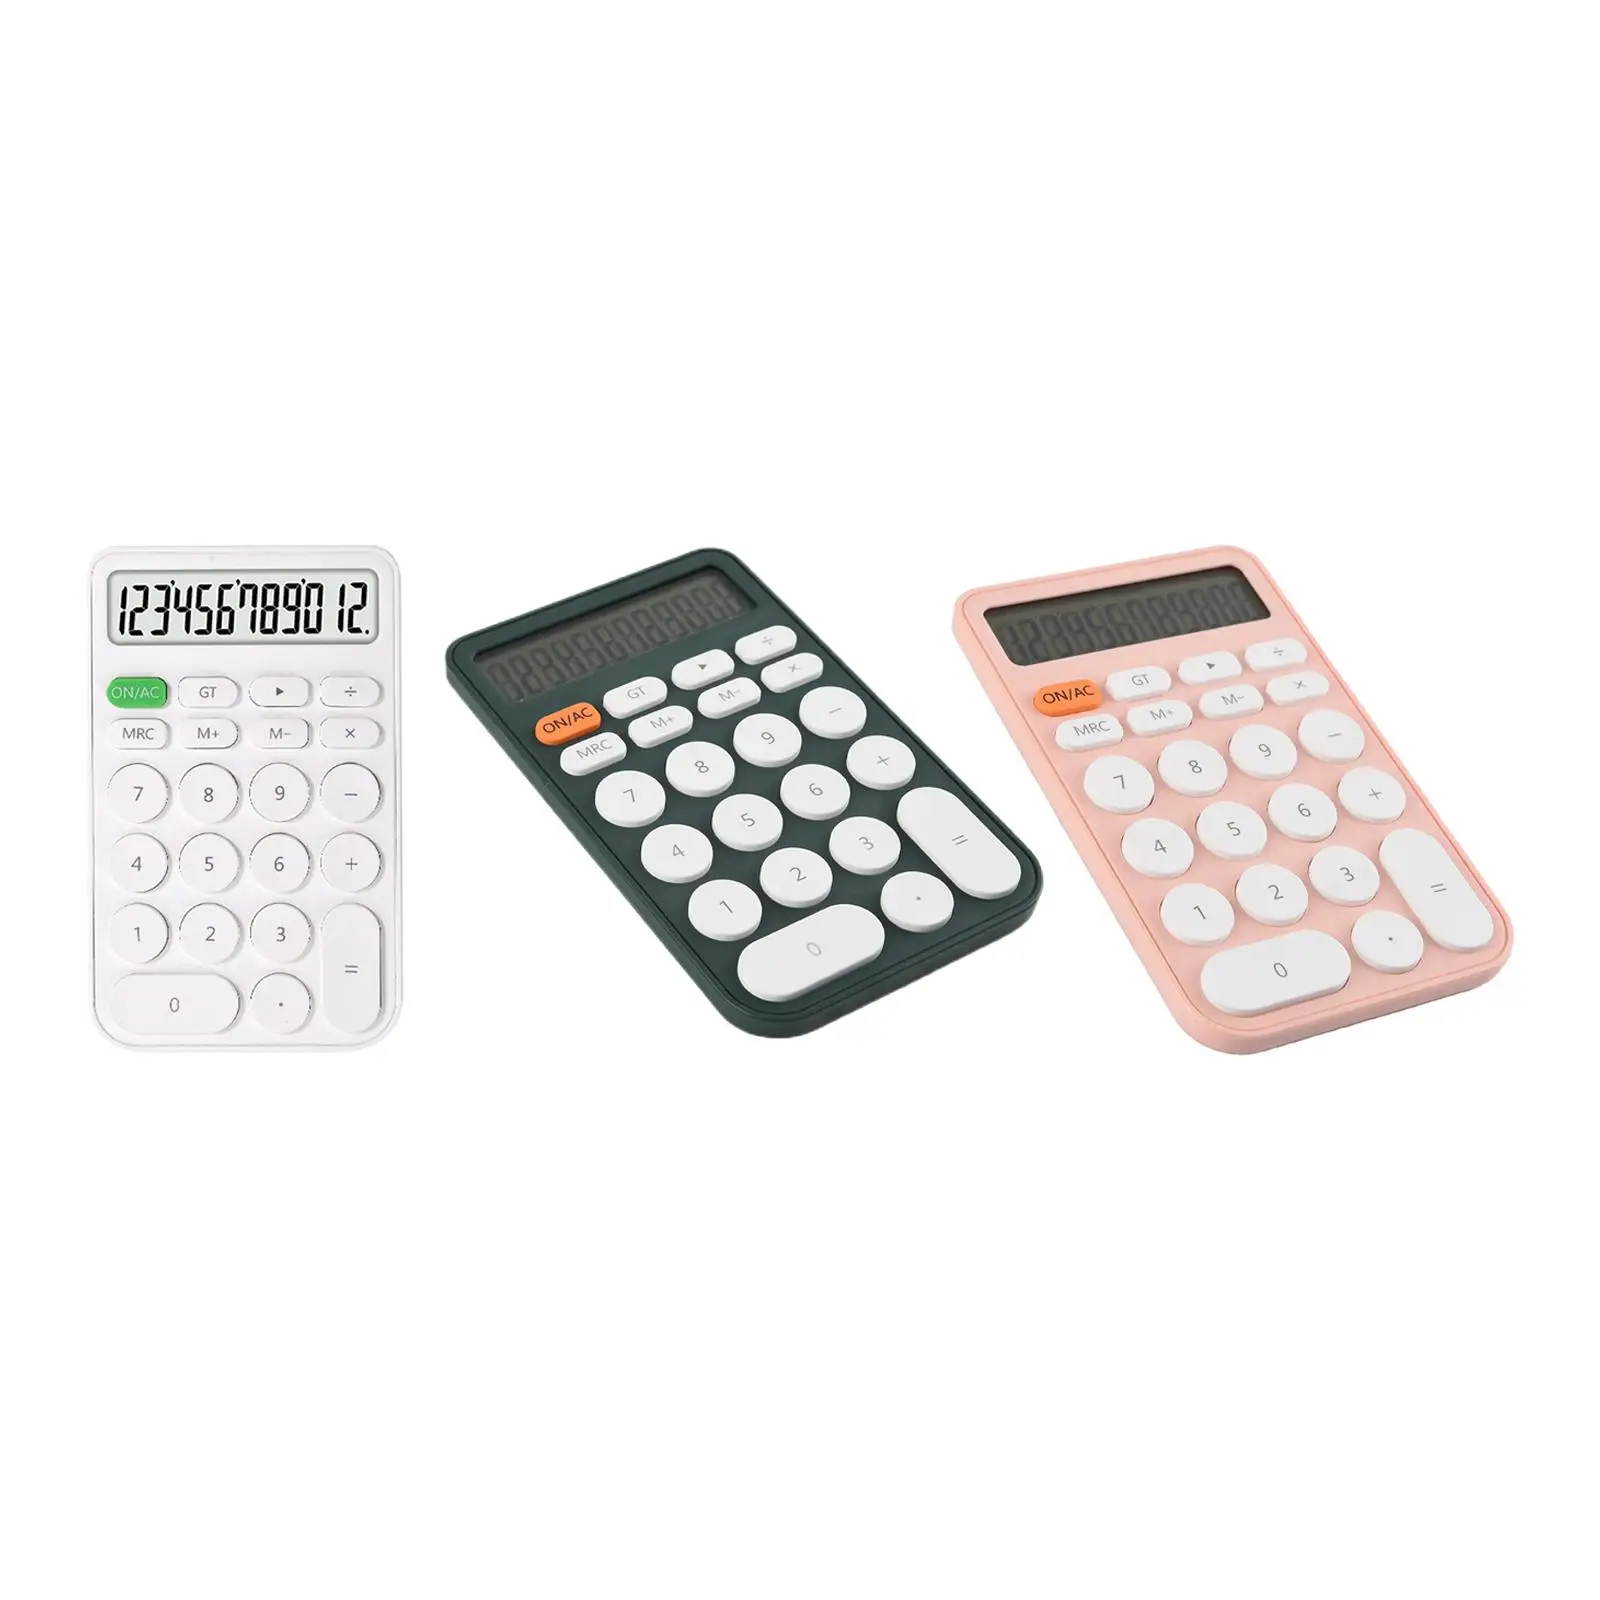 Electronic Calulator 12-Digit Cute Simple Portable Muti-Colors School Stationery Pocket Calculator for Home Office Students Kids